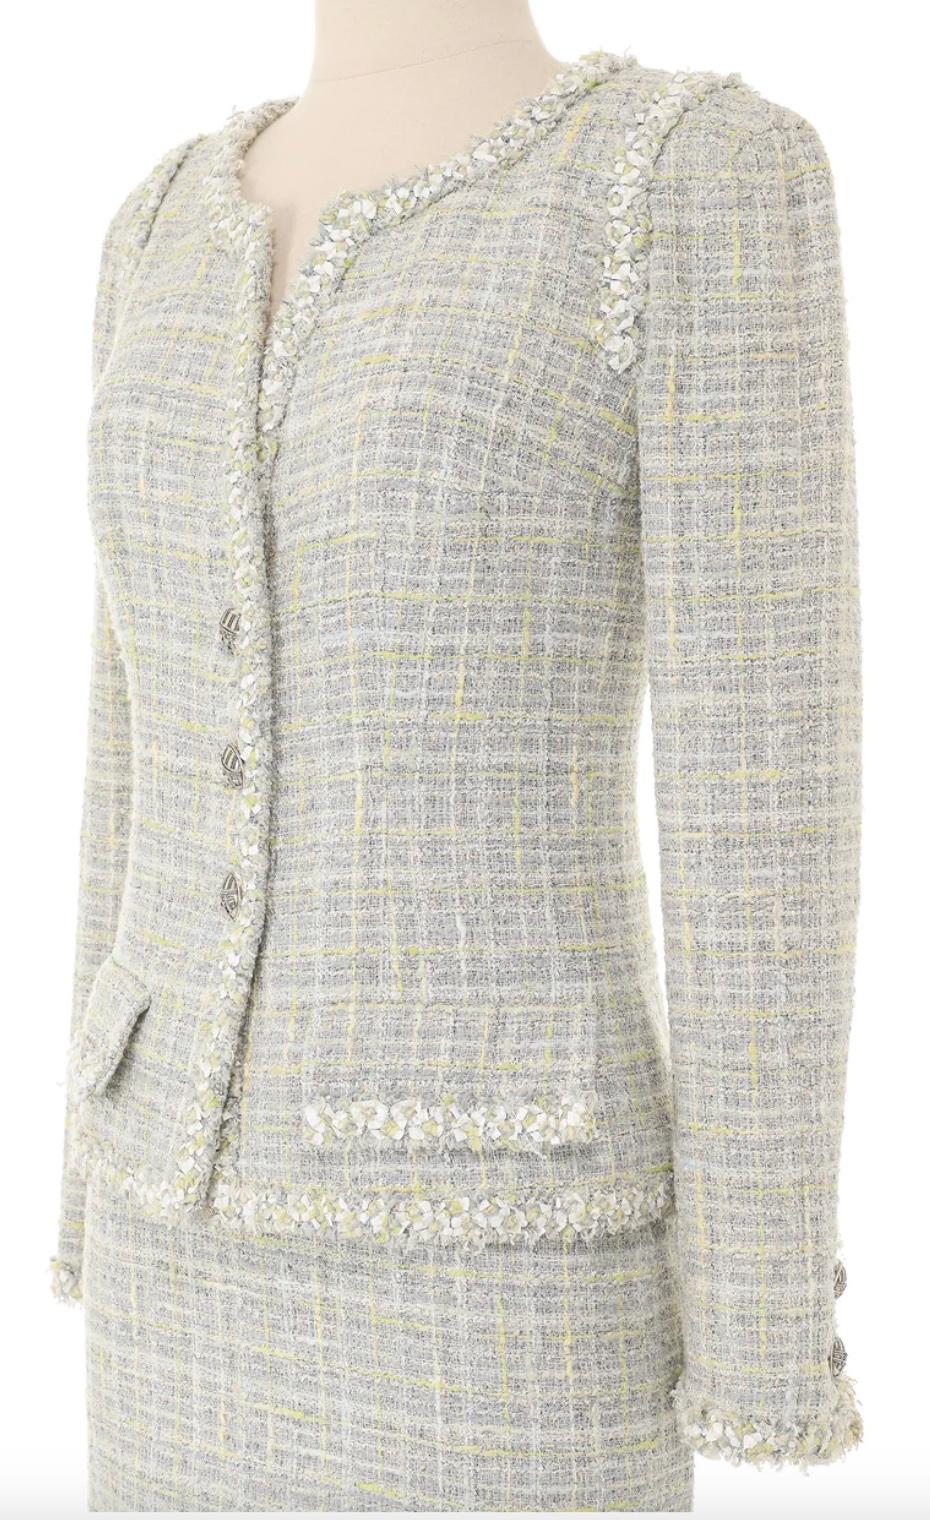 Chanel Spring 2009 Grey Tweed Skirt Suit In Excellent Condition For Sale In New York, NY